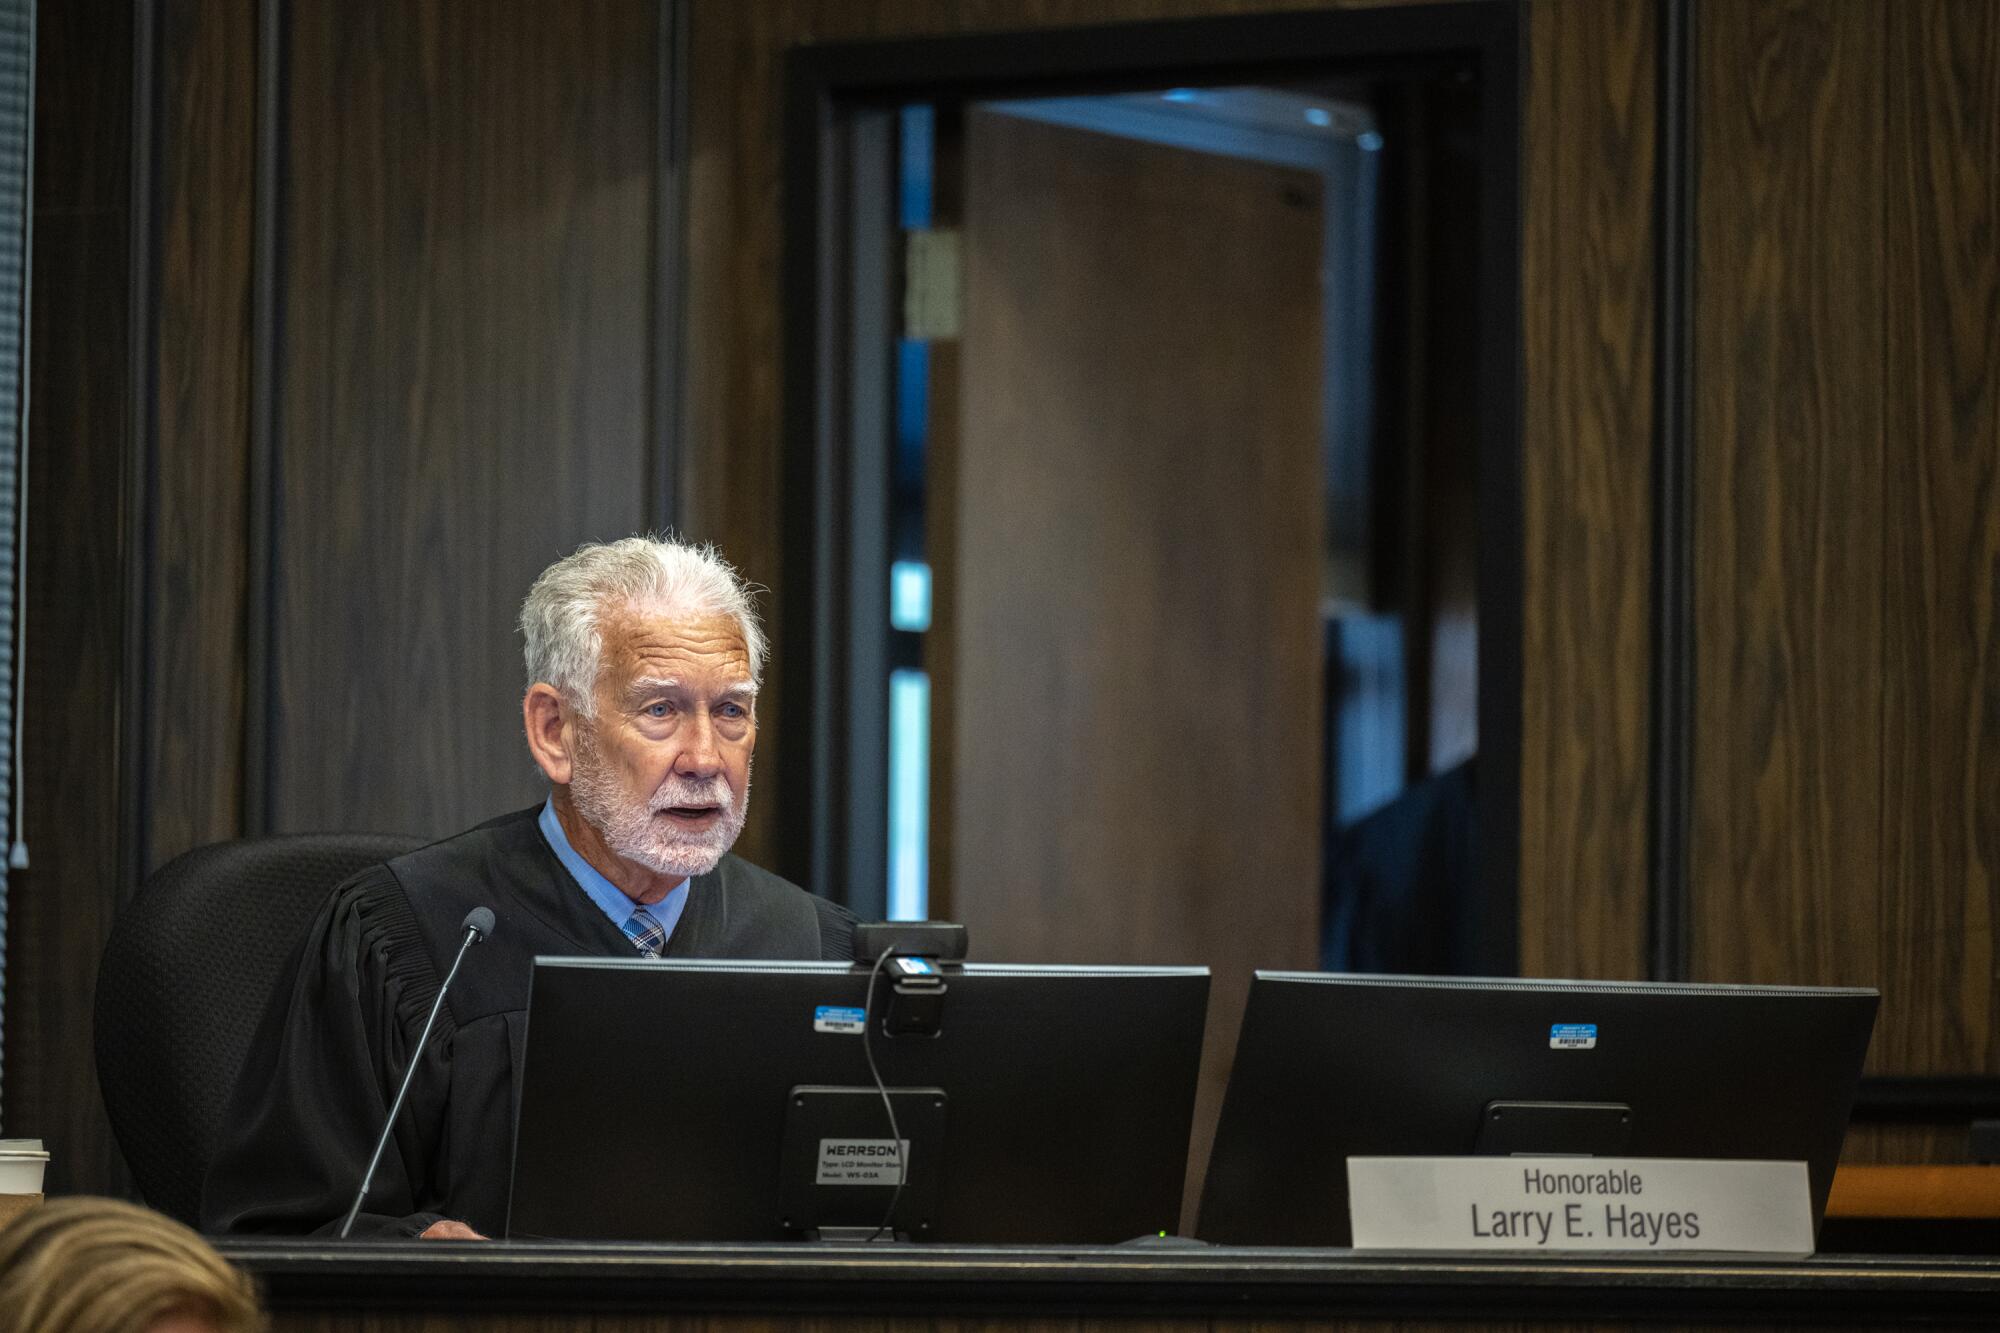 Judge Larry E. Hayes sits on the bench with two computer monitors and a microphone.